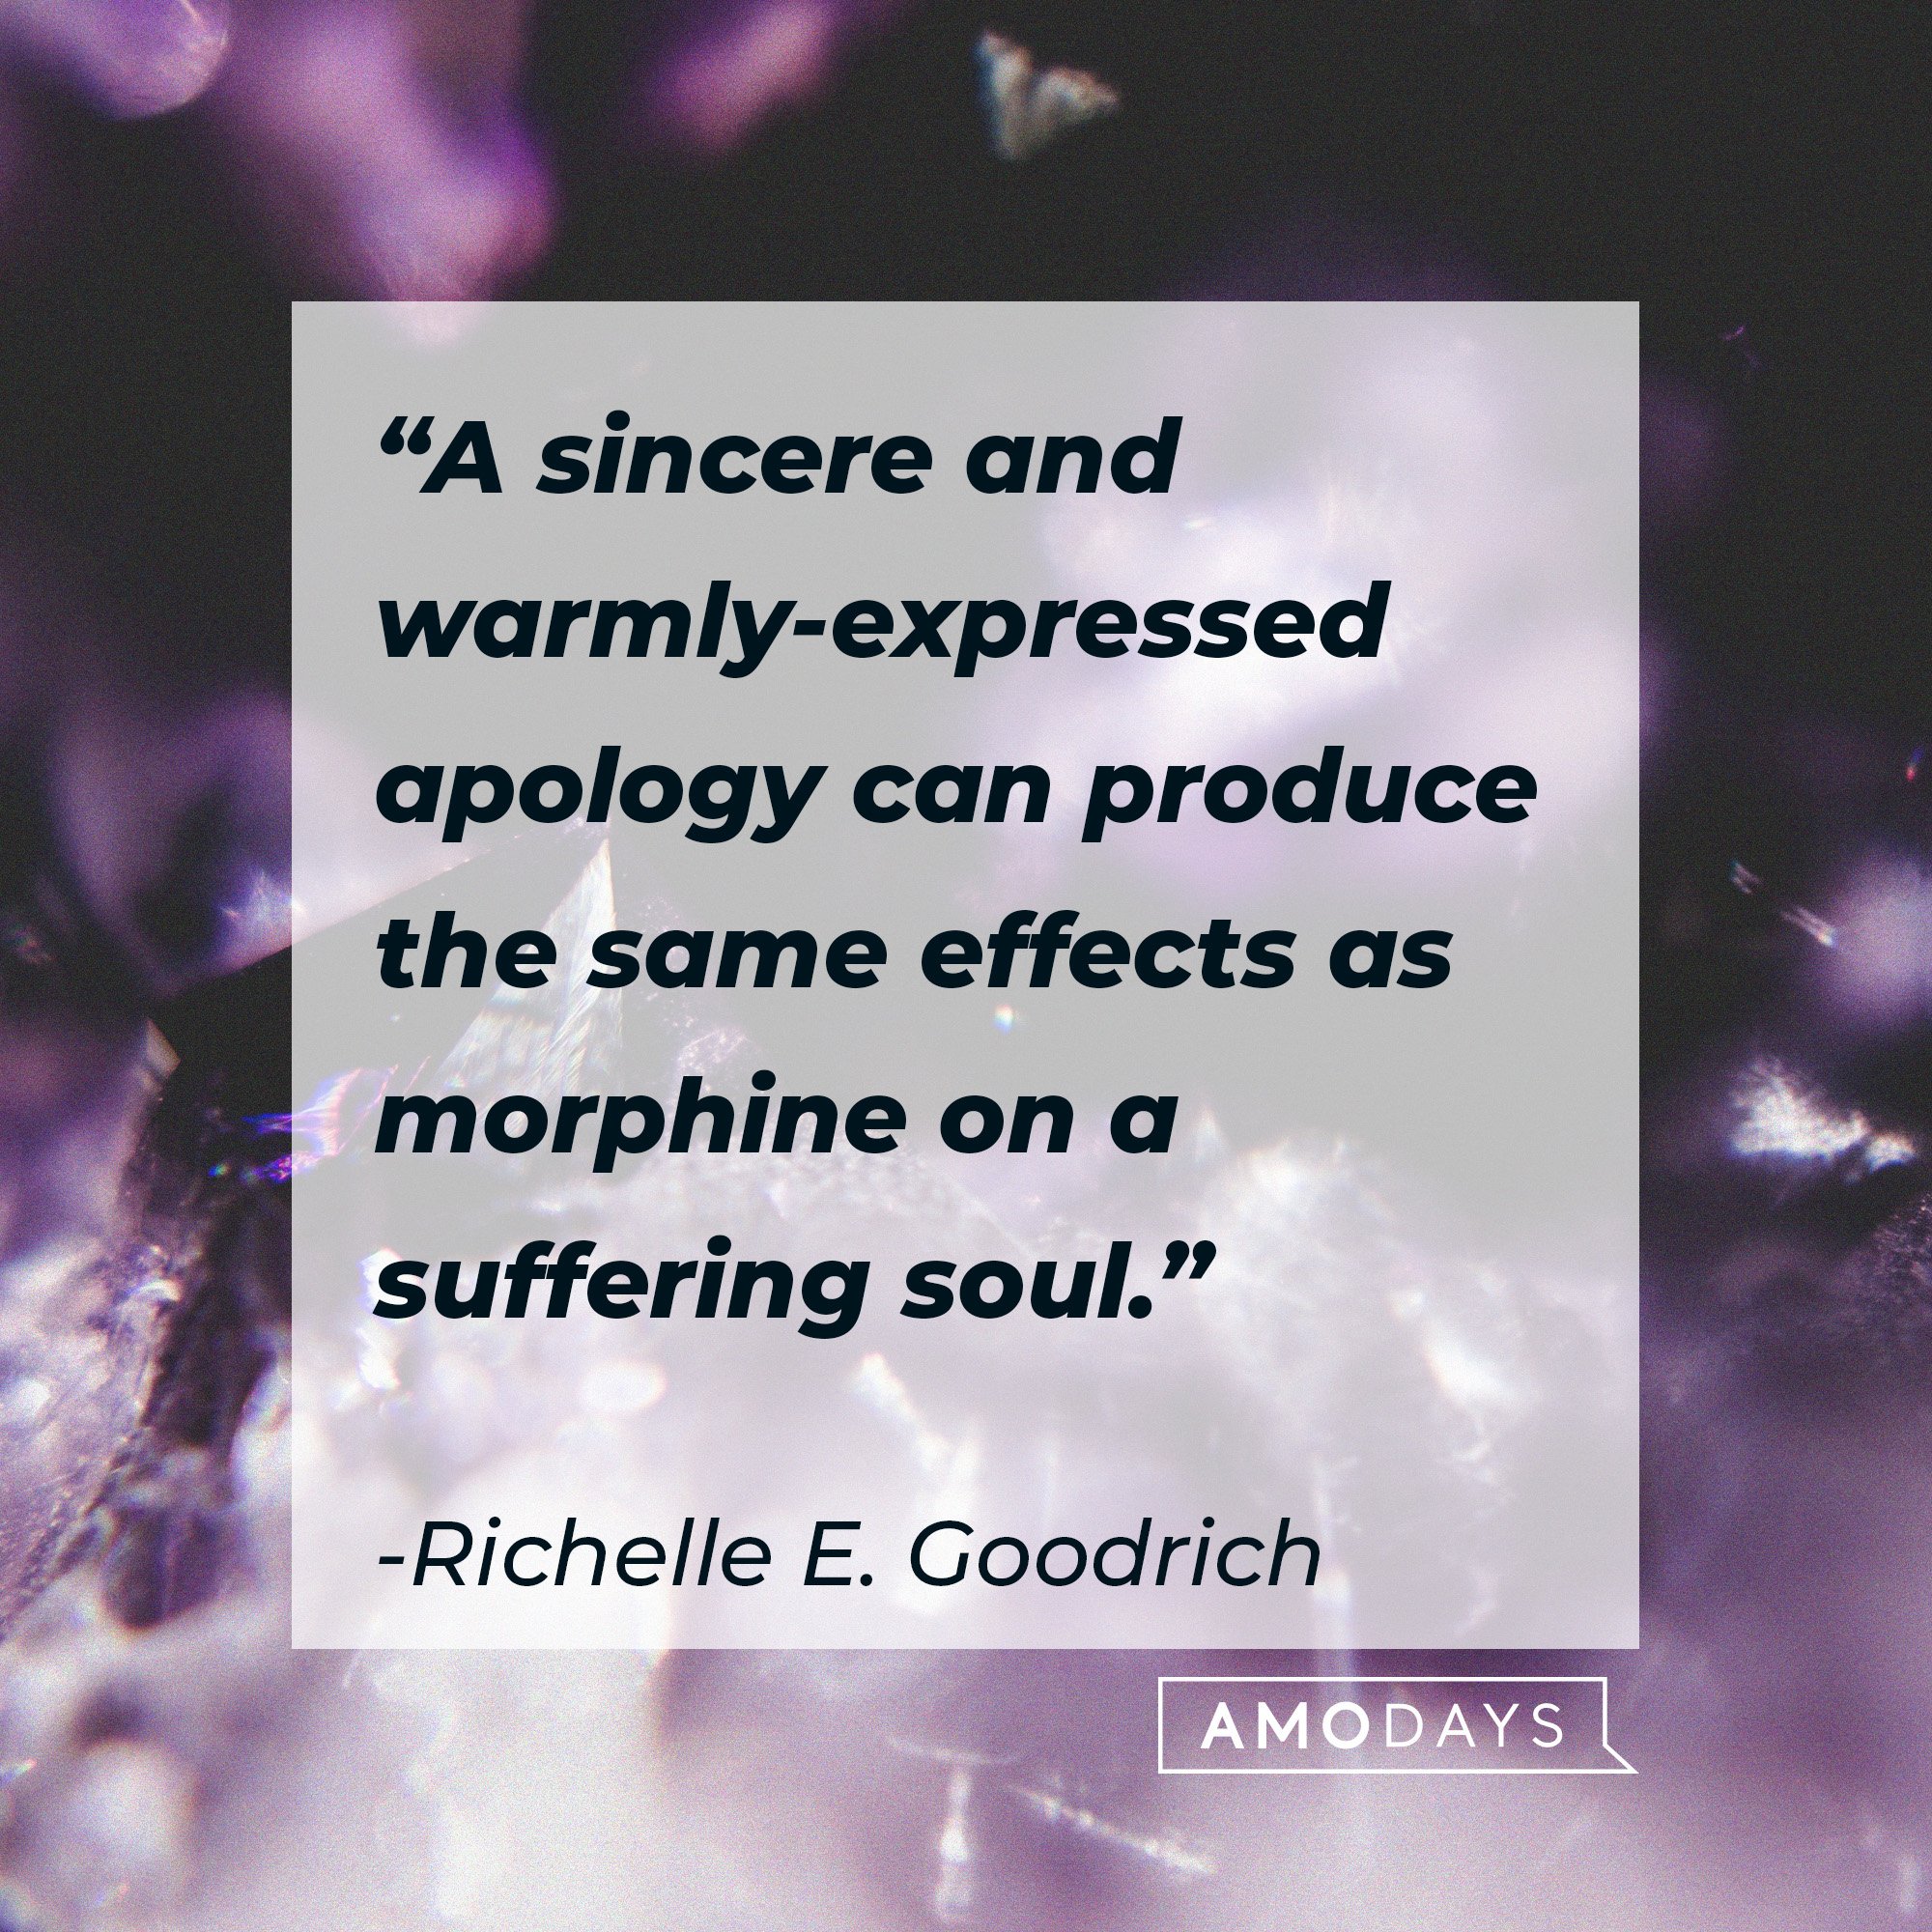  “A sincere and warmly-expressed apology can produce the same effects as morphine on a suffering soul.” | Image: Richelle E. Goodrich